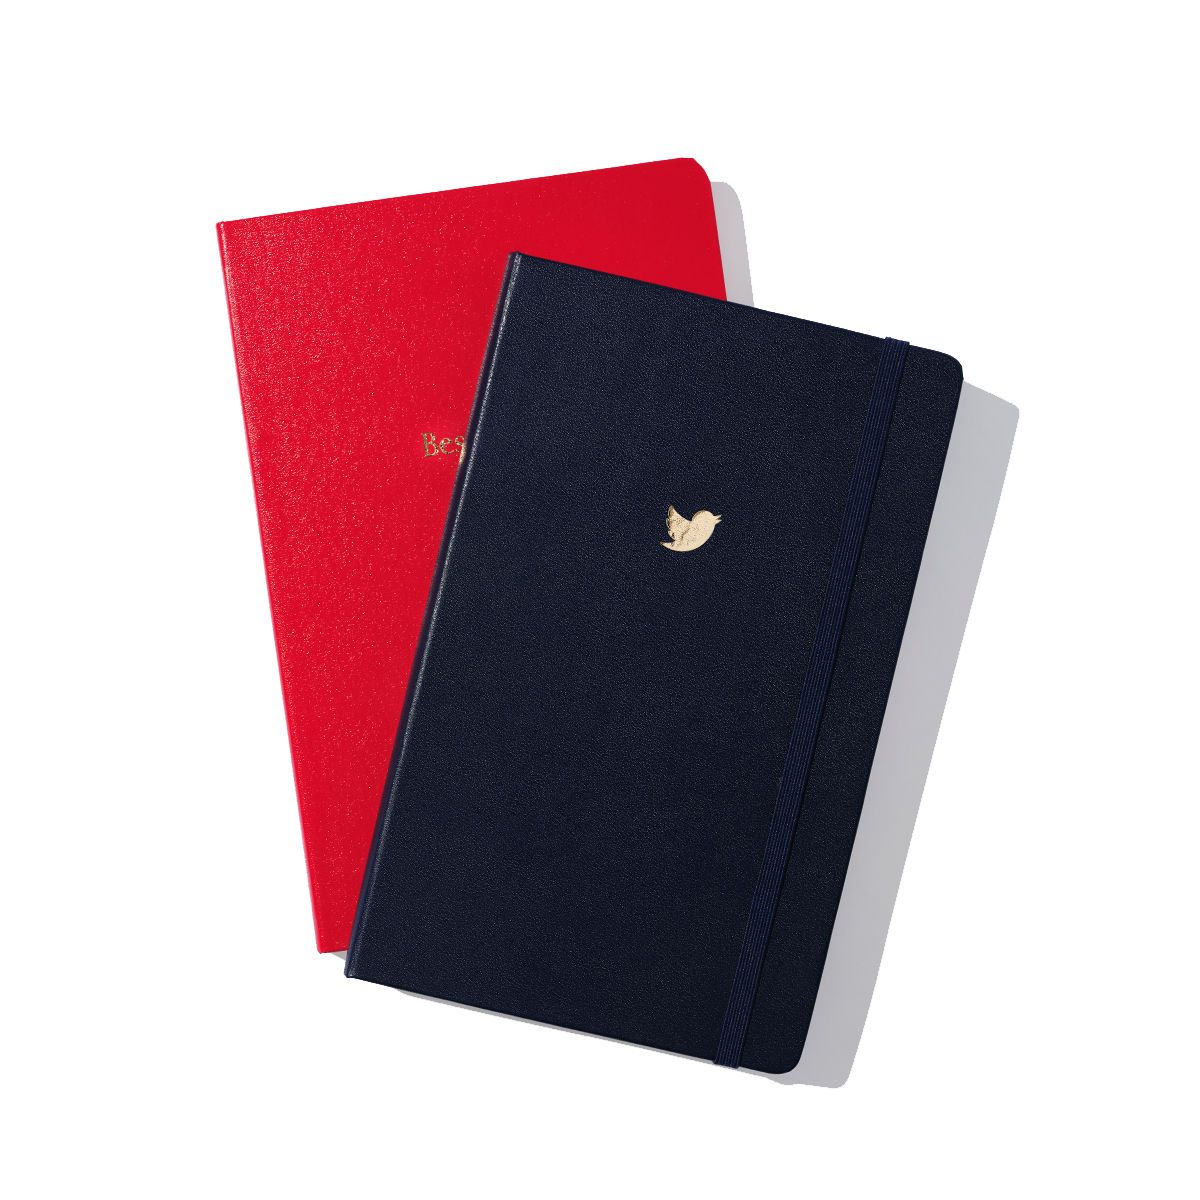 A5-Notebook--Trio-Bespokely-12-12_ef9c45dc-060a-4a69-8a1c-746cf9e685fe.png